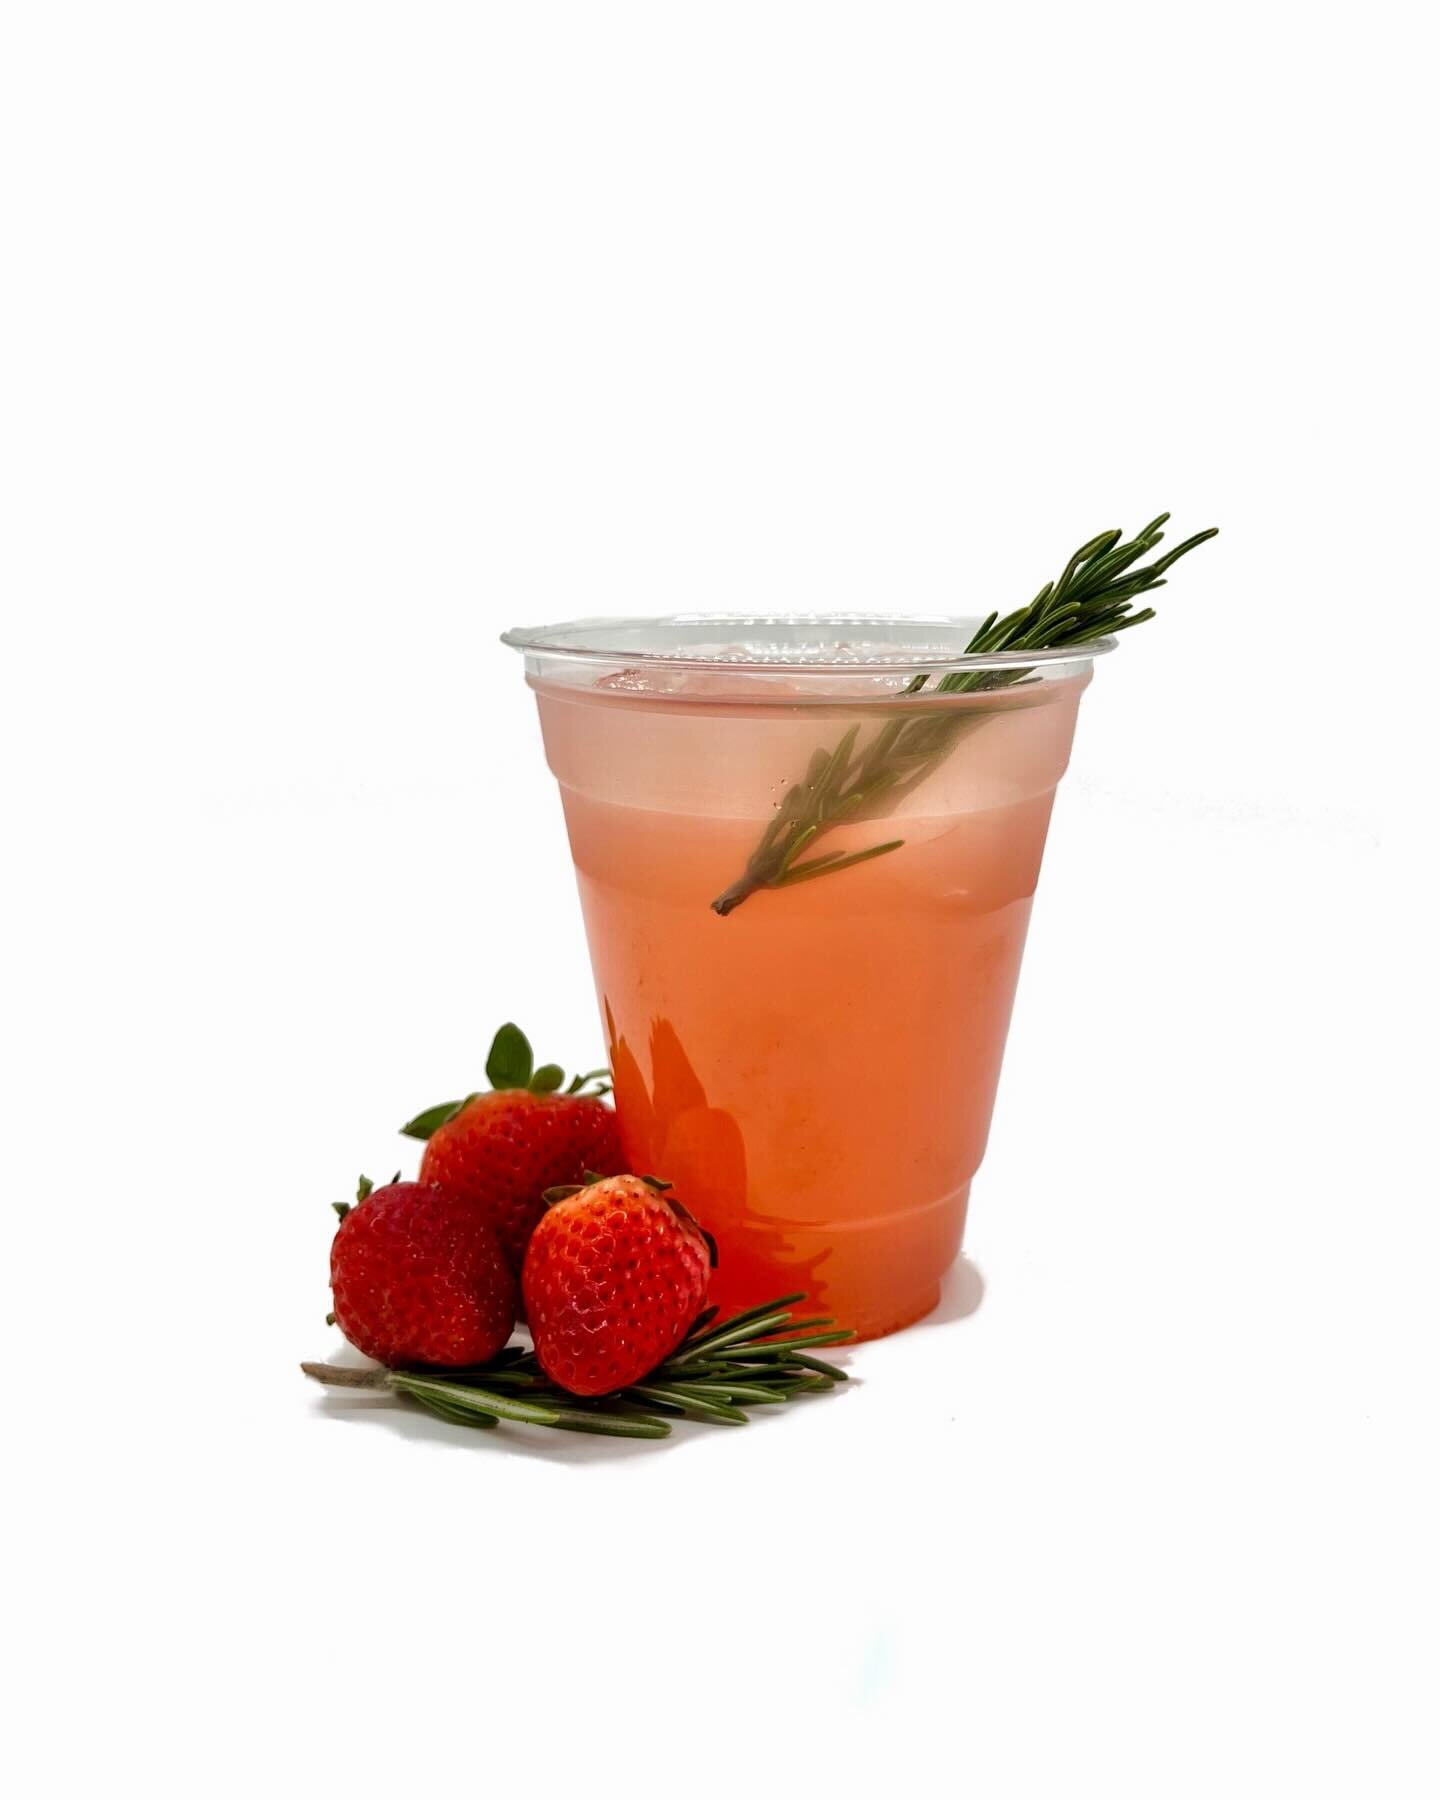 Introducing our second seasonal signature drink! Embark on a journey of refreshment with our Jet Lag&mdash;a vibrant strawberry energy drink adorned with a fragrant rosemary sprig. Select this tasty treat as an add-on during booking. 🍓🌱